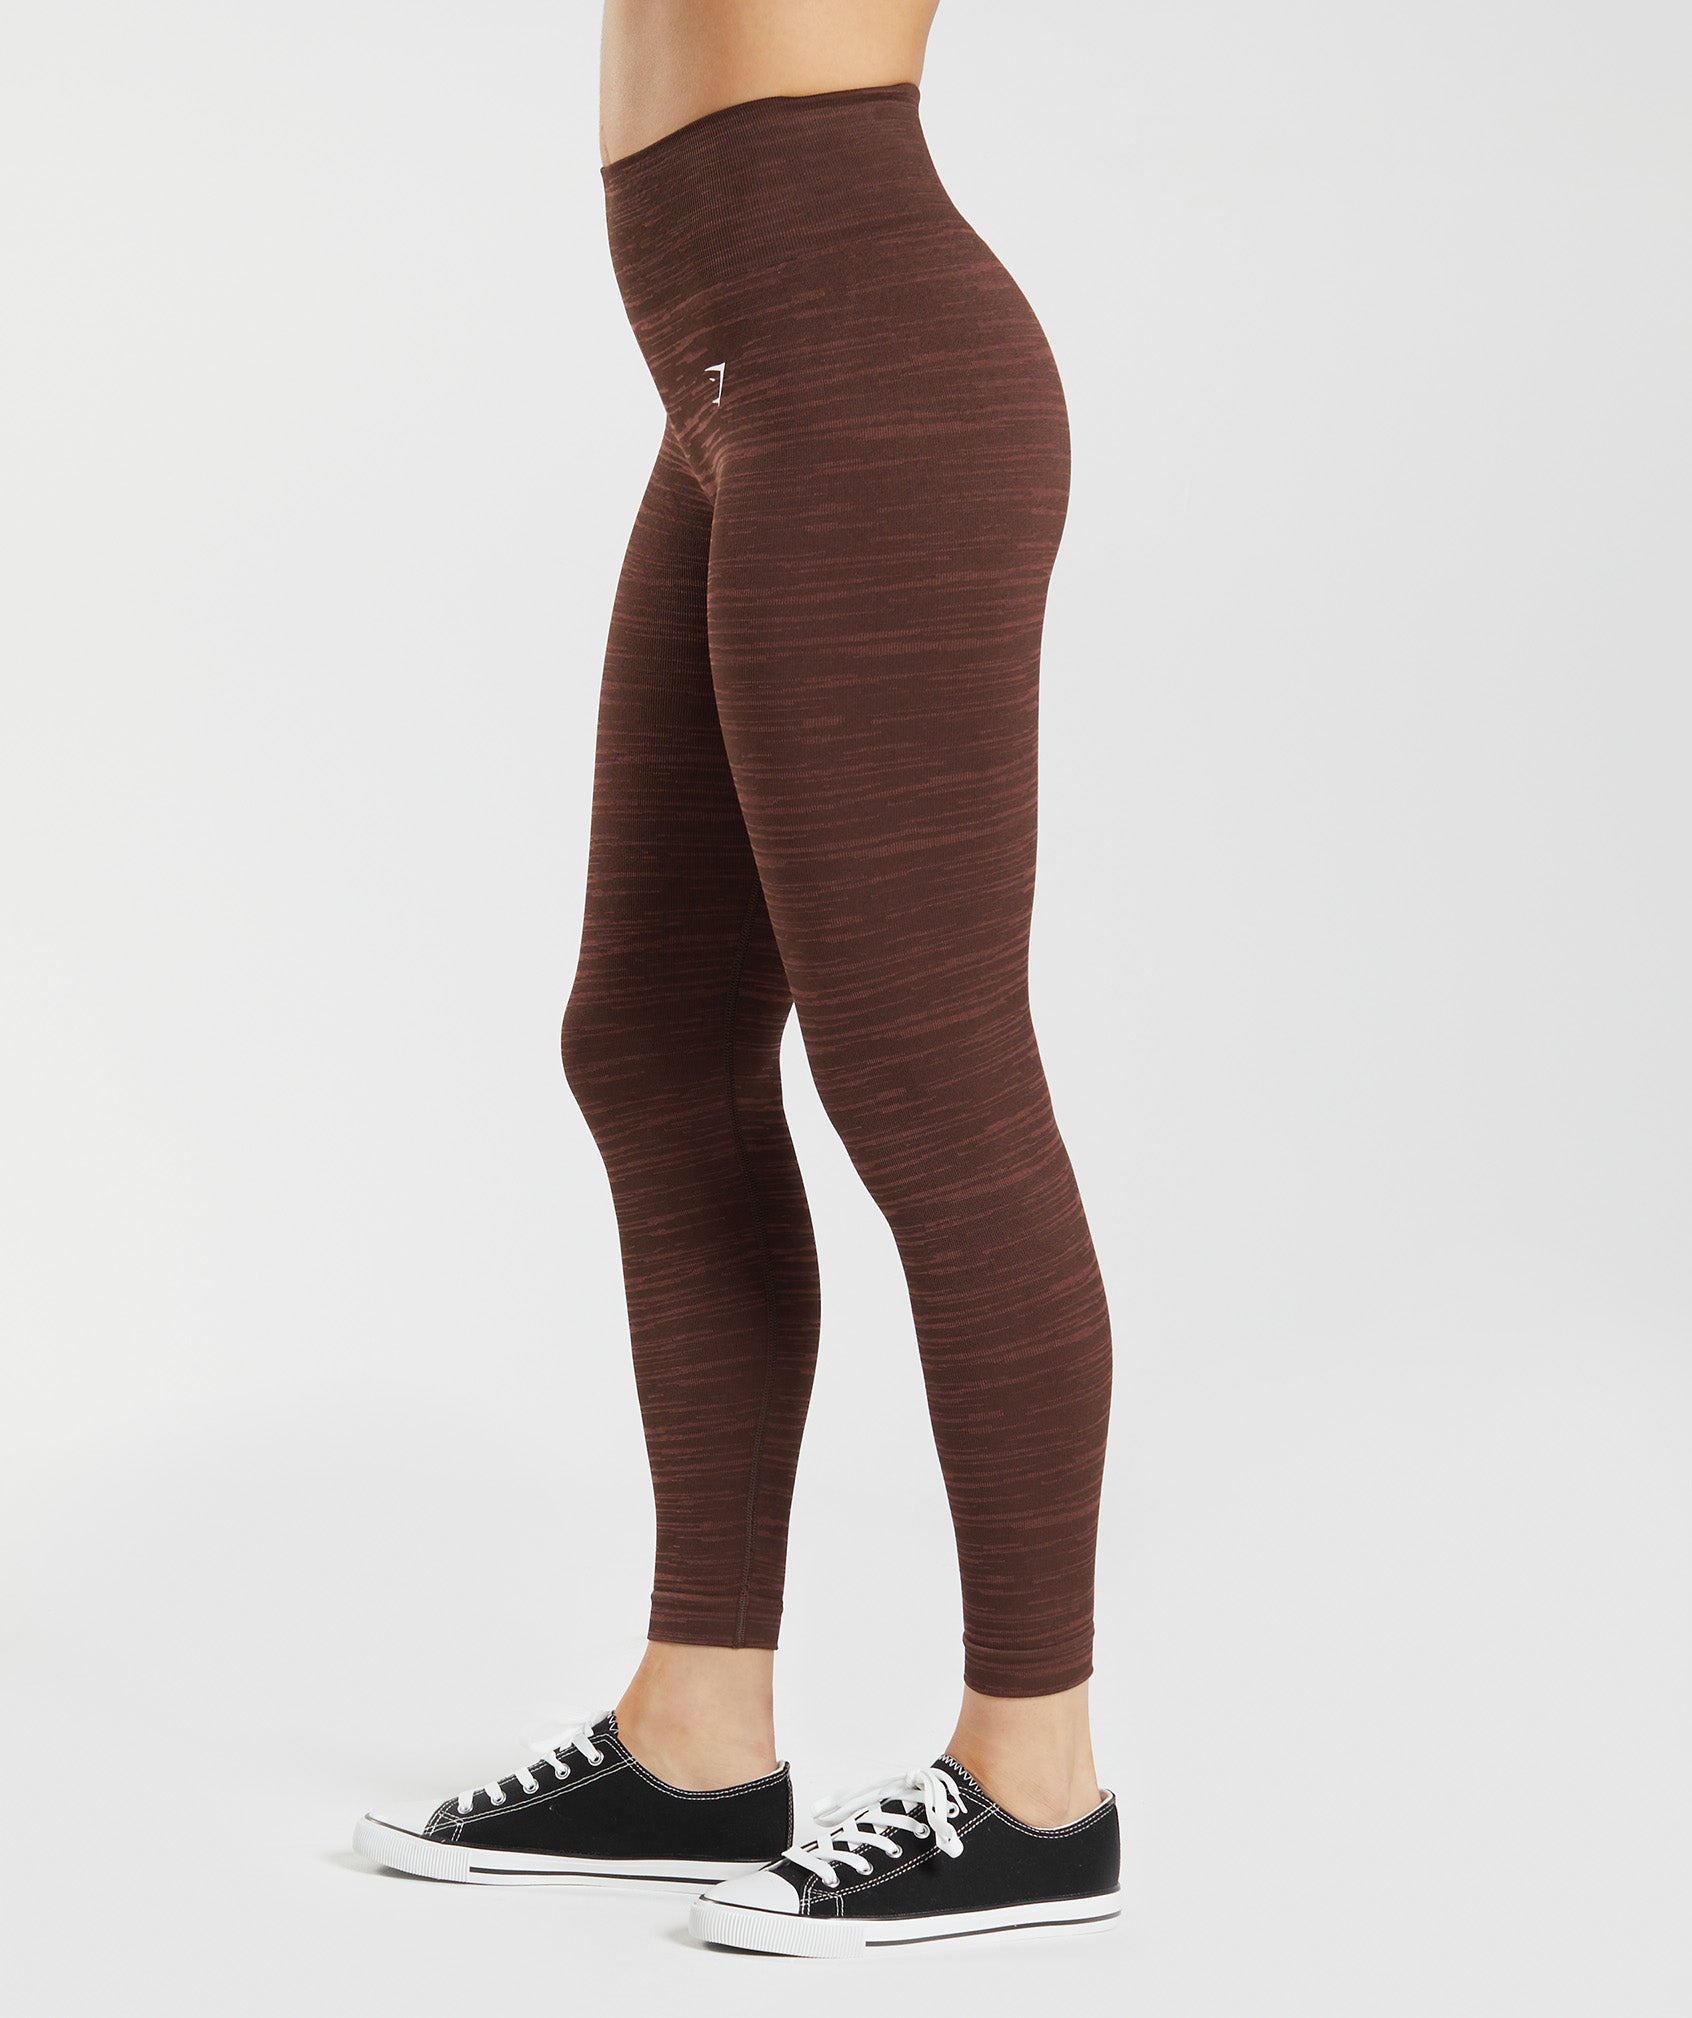 Flat Ribbed Nourish, Leggings, Chocolate Brown, High-Waisted Gym Leggings, Activewear Compression Leggings for Women